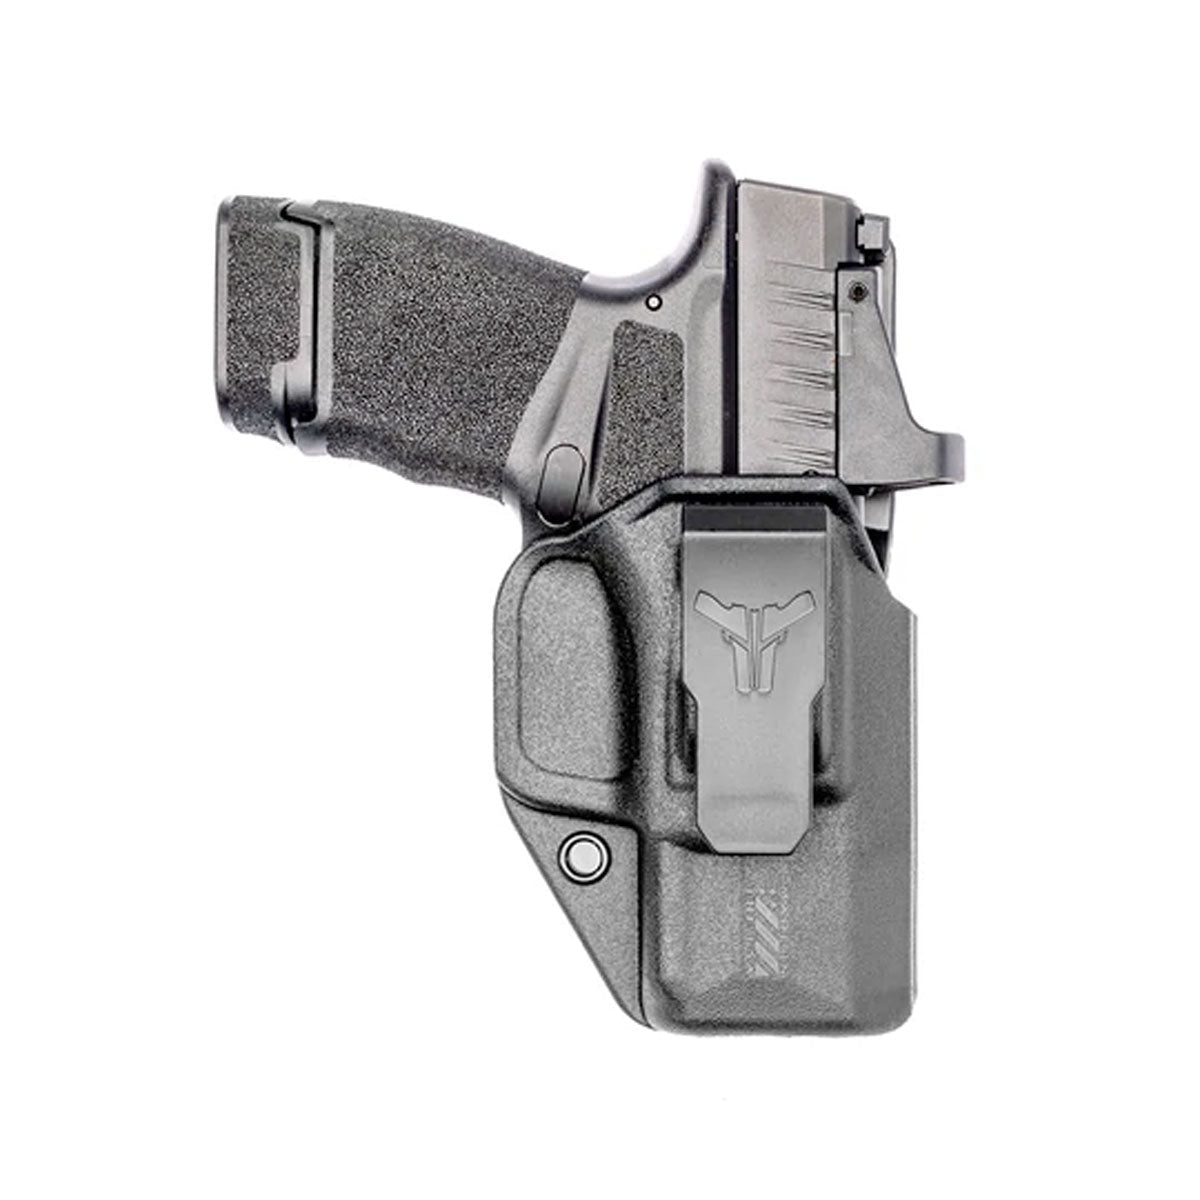 Blade-Tech Klipt IWB Holster Black Right Hand Only Holsters Blade-Tech Holsters Springfield Hellcat Tactical Gear Supplier Tactical Distributors Australia